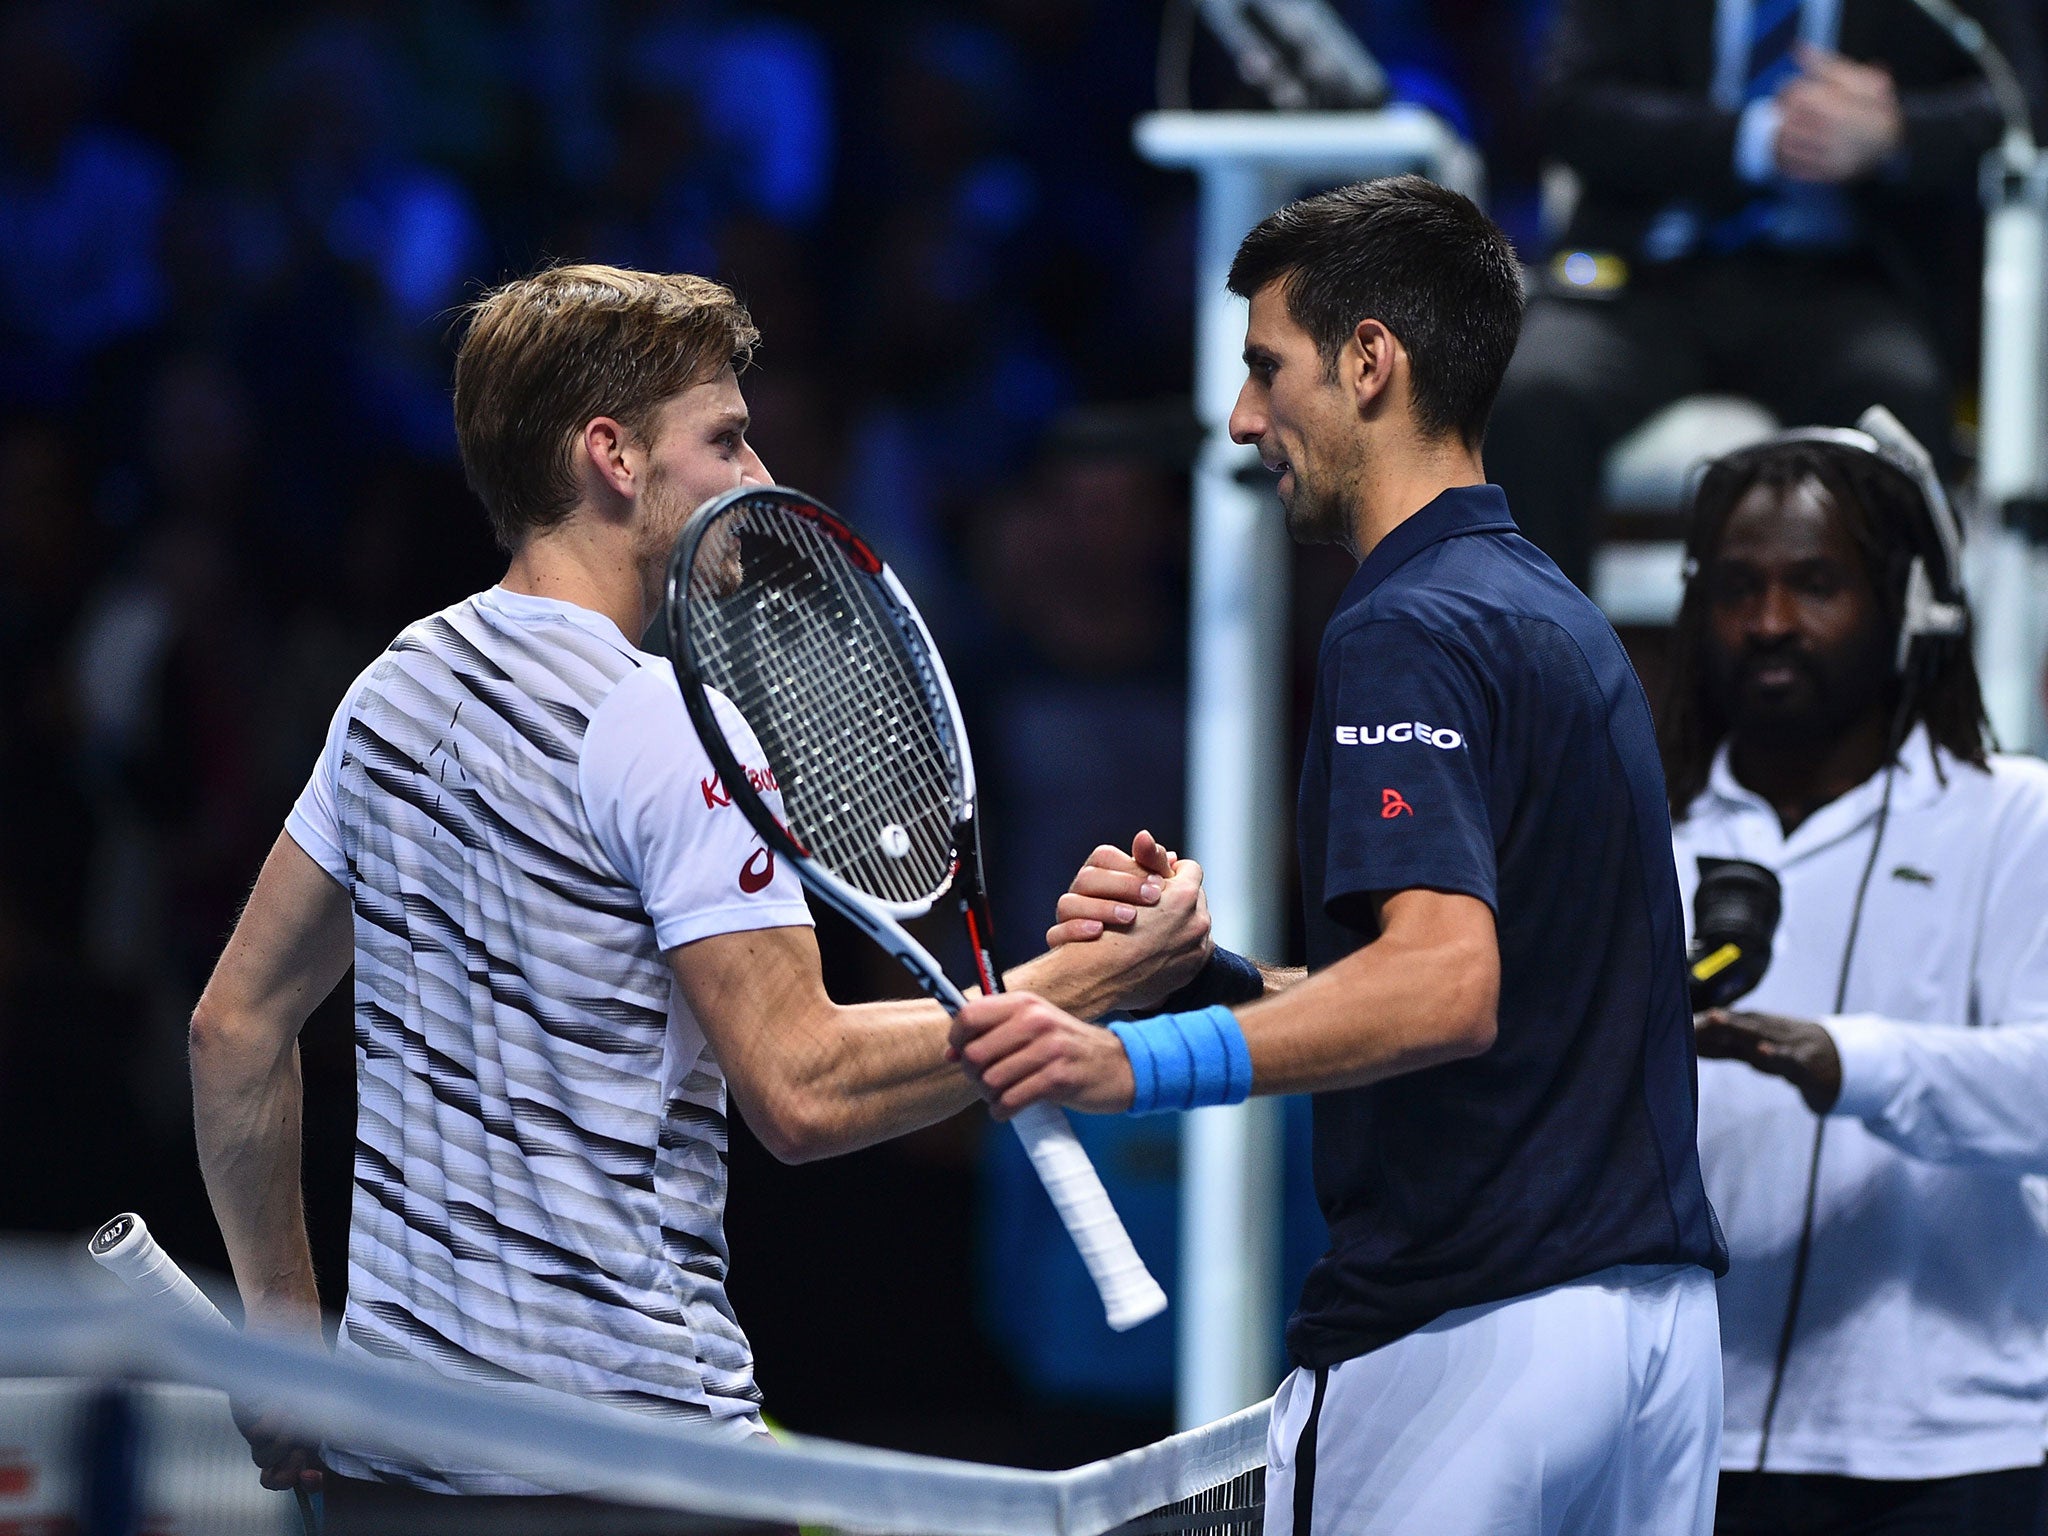 Djokovic and Goffin shake hands after their group match at the ATP World Tour Finals